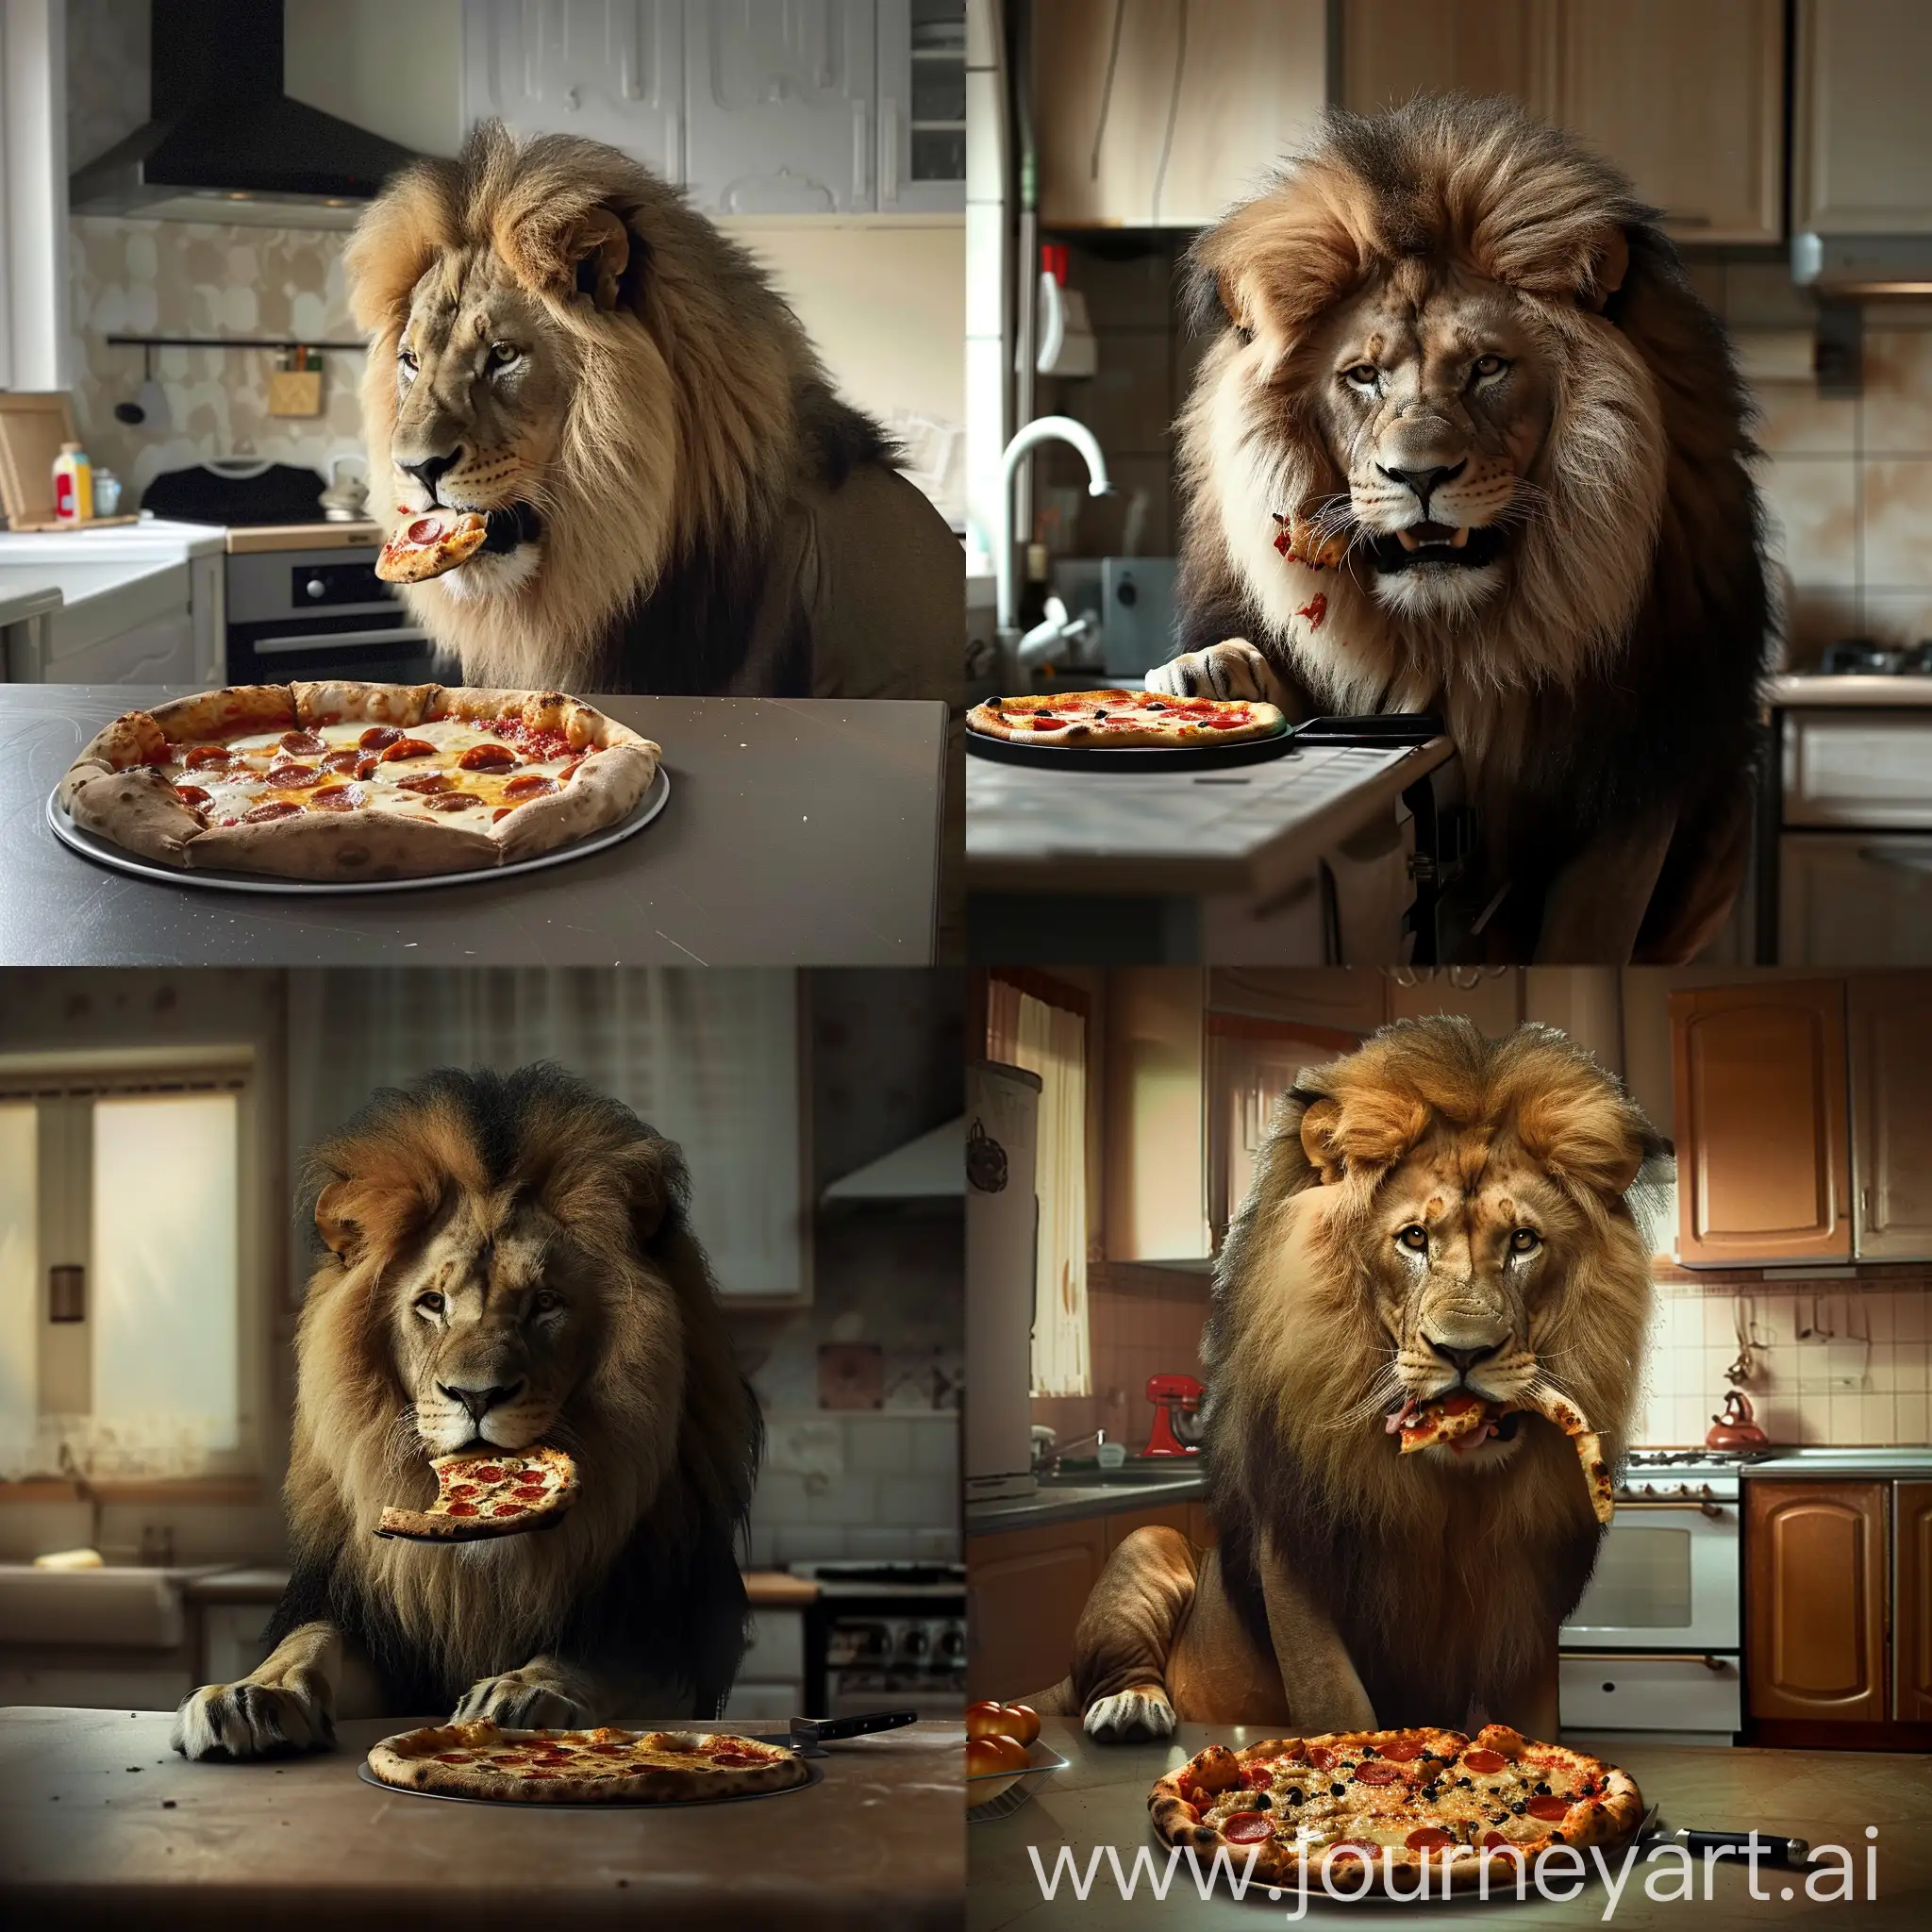 Lion-Enjoying-Pizza-in-a-Cozy-Kitchen-Setting